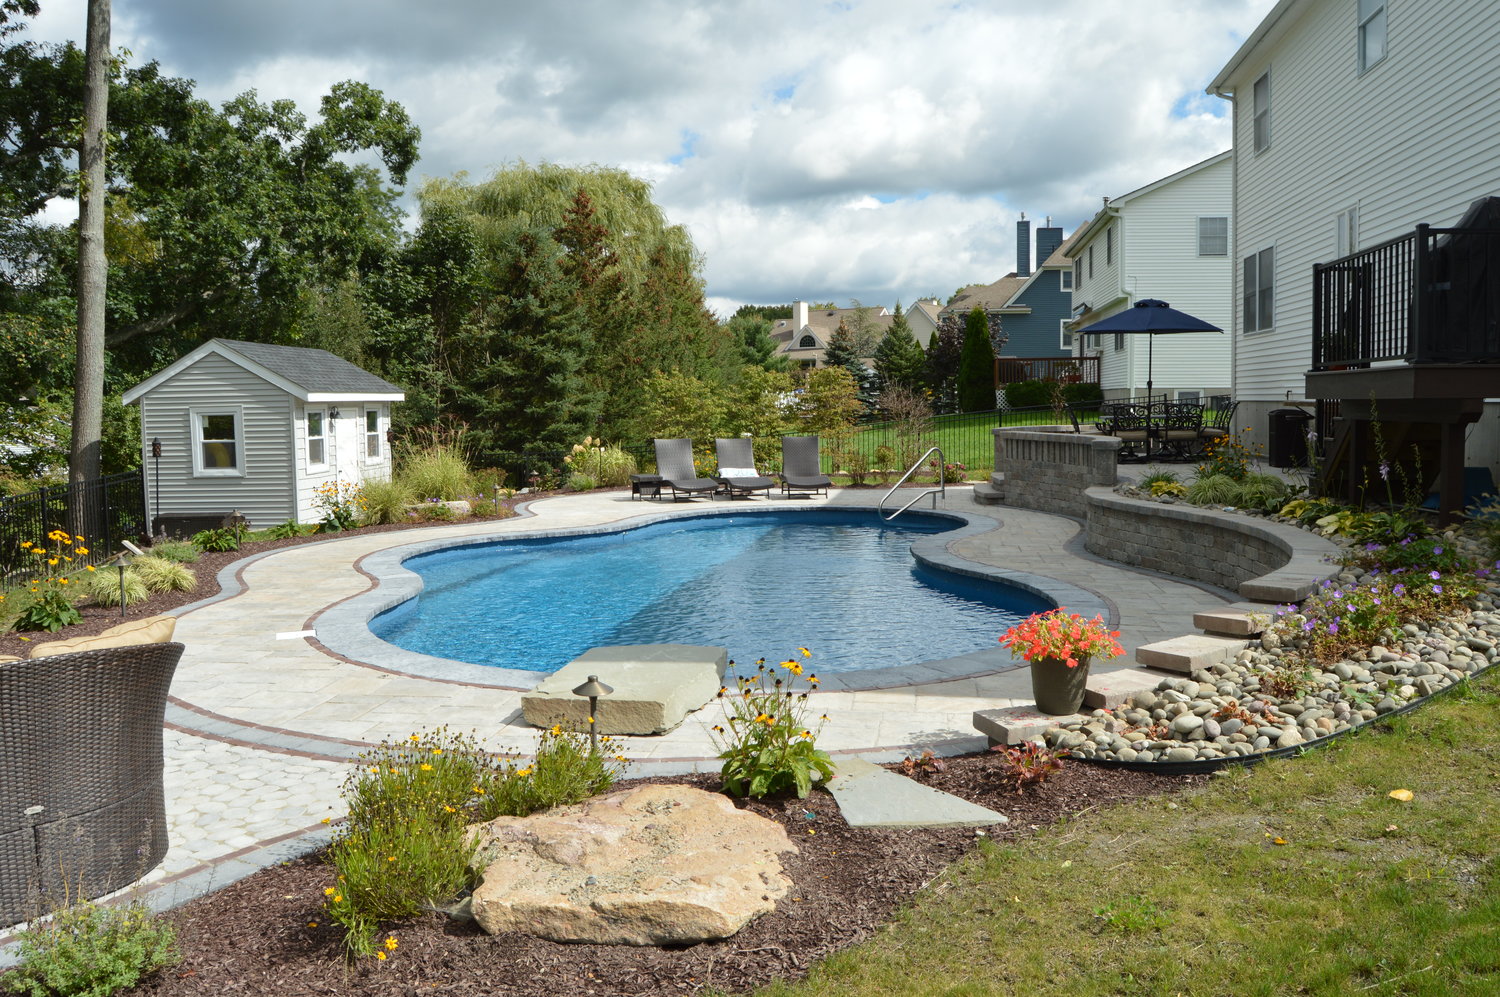 spruce up your swimming pool this summer with these landscape